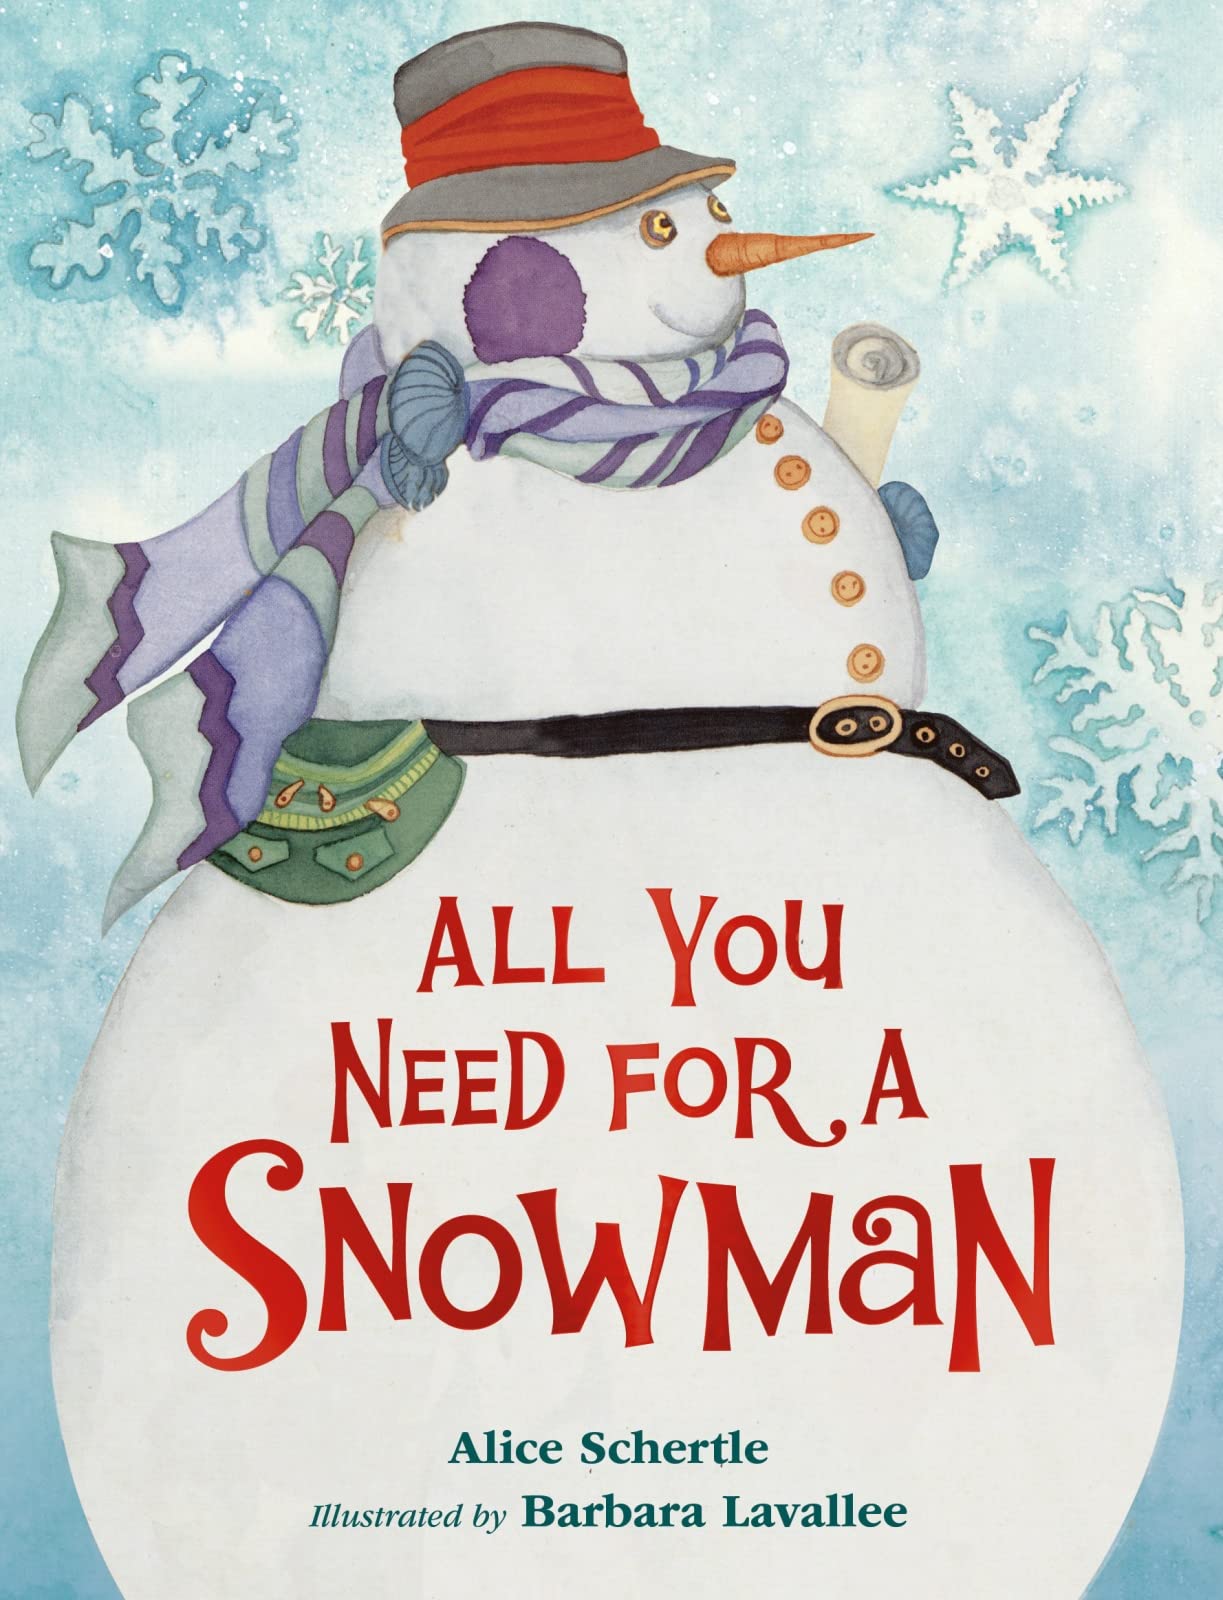 speech and language teaching concepts for All You Need For A Snowman in speech therapy​ ​